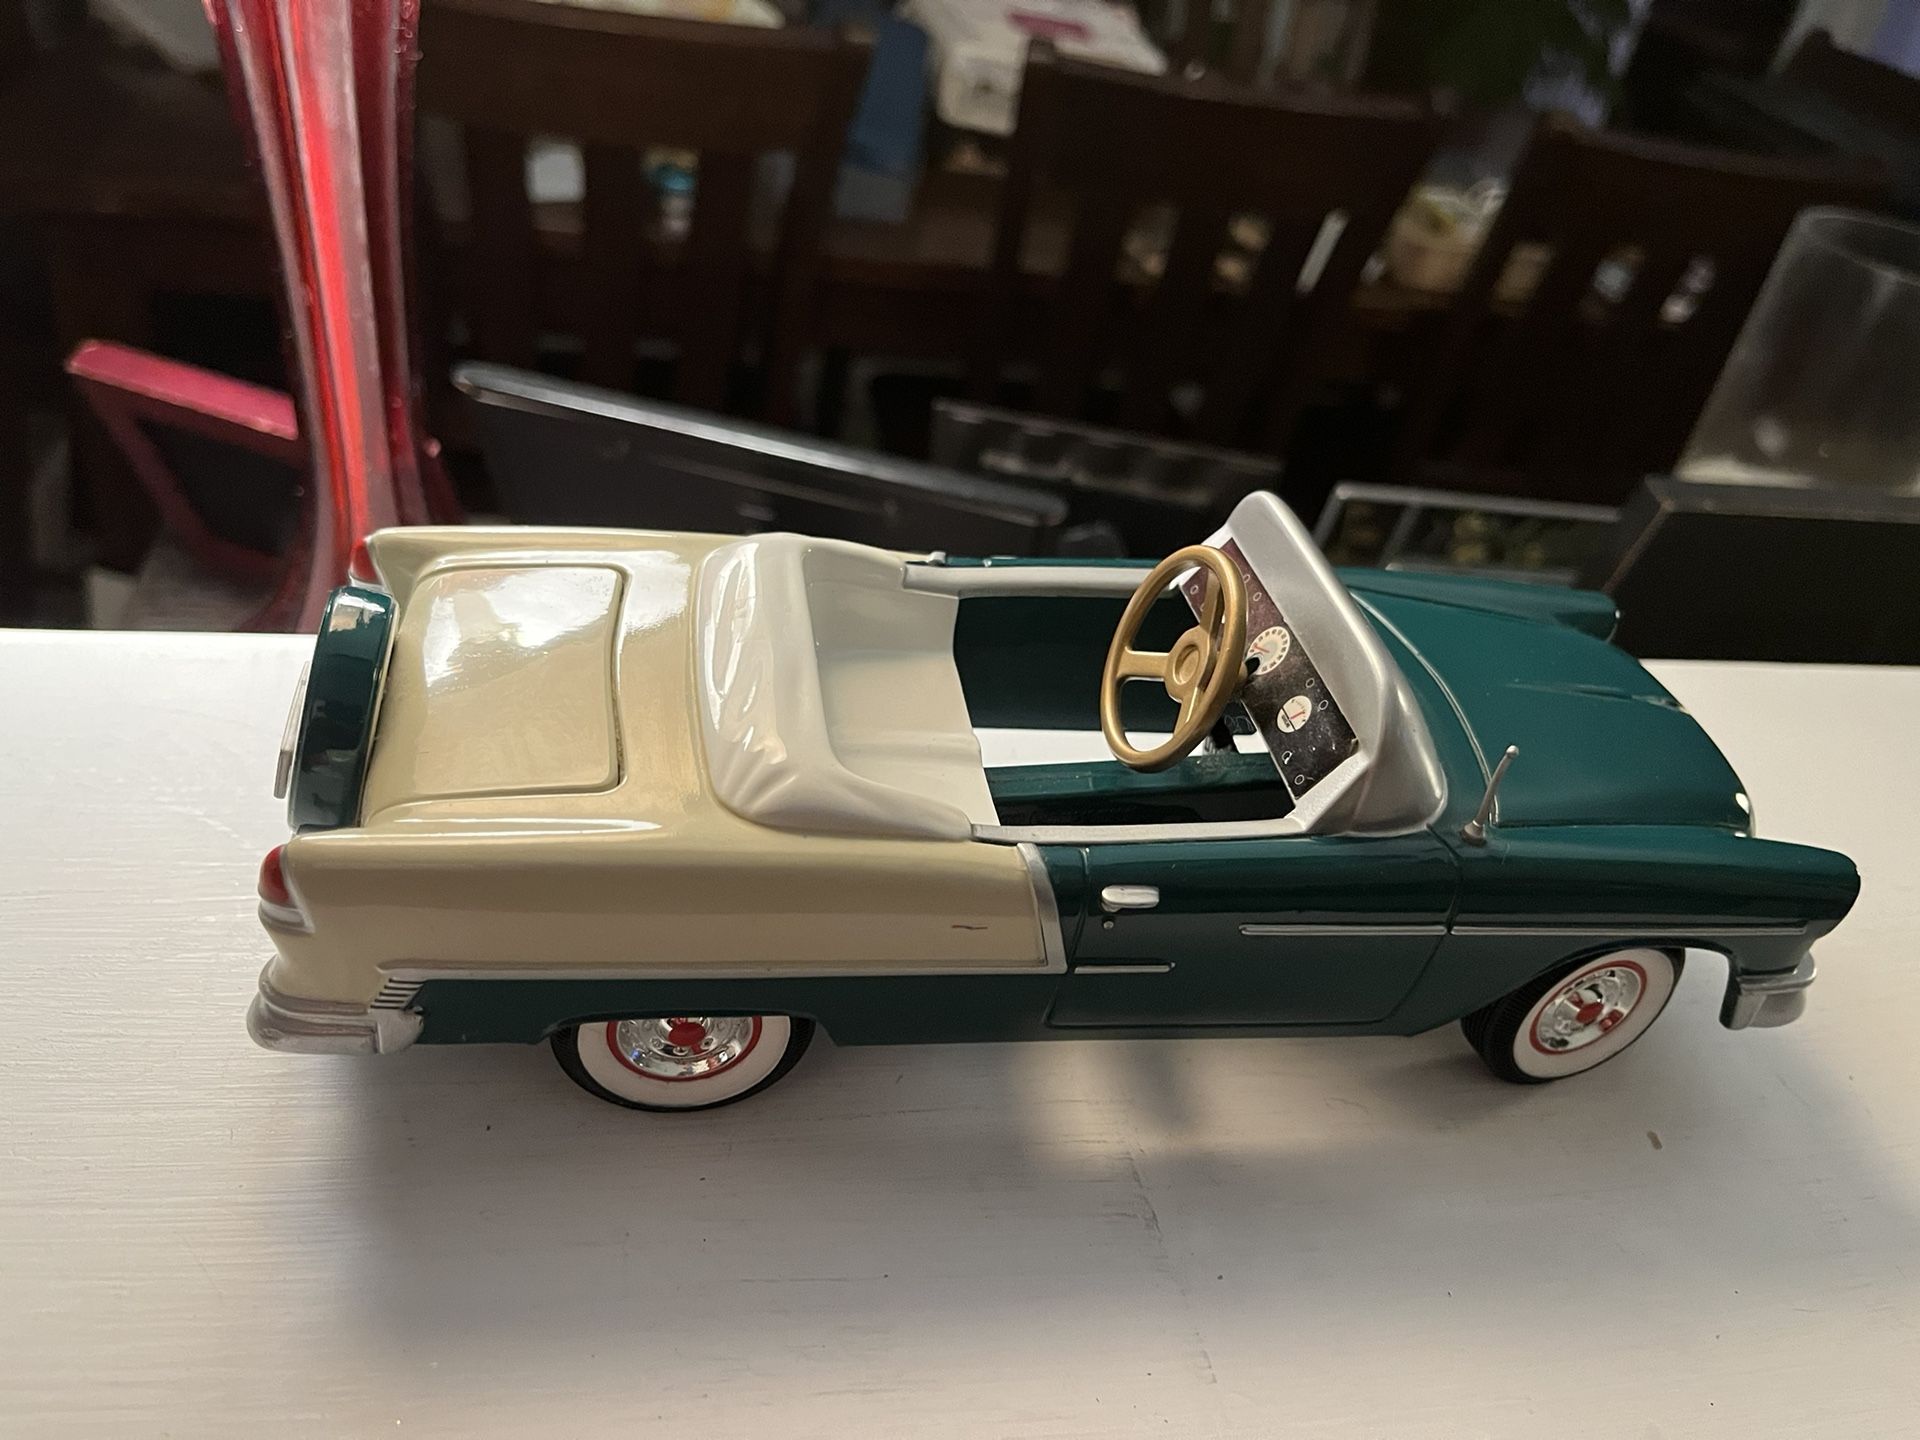 unique rare Vintage 1955 Bel Air chevy with hidden trunk piggy bank, moving steering wheel, pedals car toy